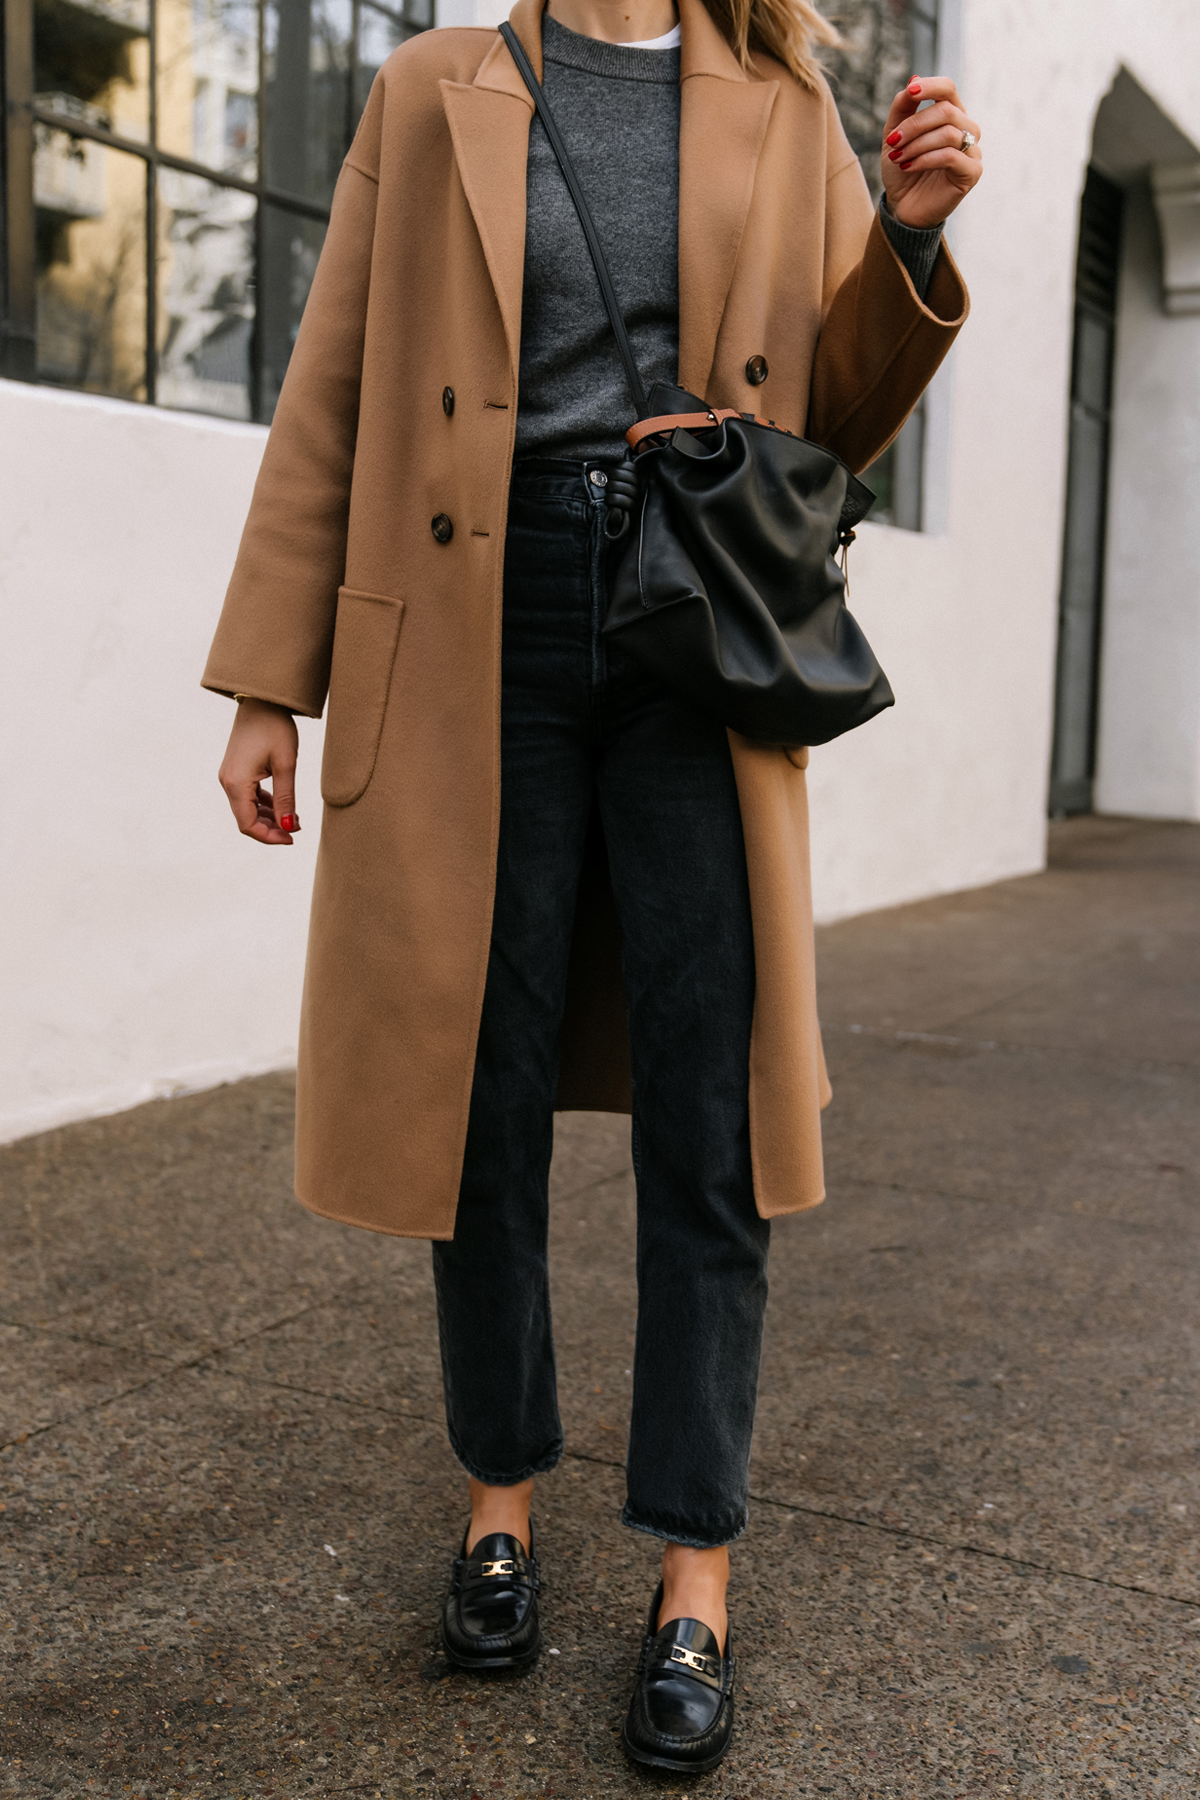 Fashion Jackson Wearing Anine Bing Dylan Coat Charcoal Sweater AGOLDE Black Jeans Celine Luco Triomphe Loafers Black Loewe Flamenco Handbag Camel Coat Outfit For Women Loafer Outfit